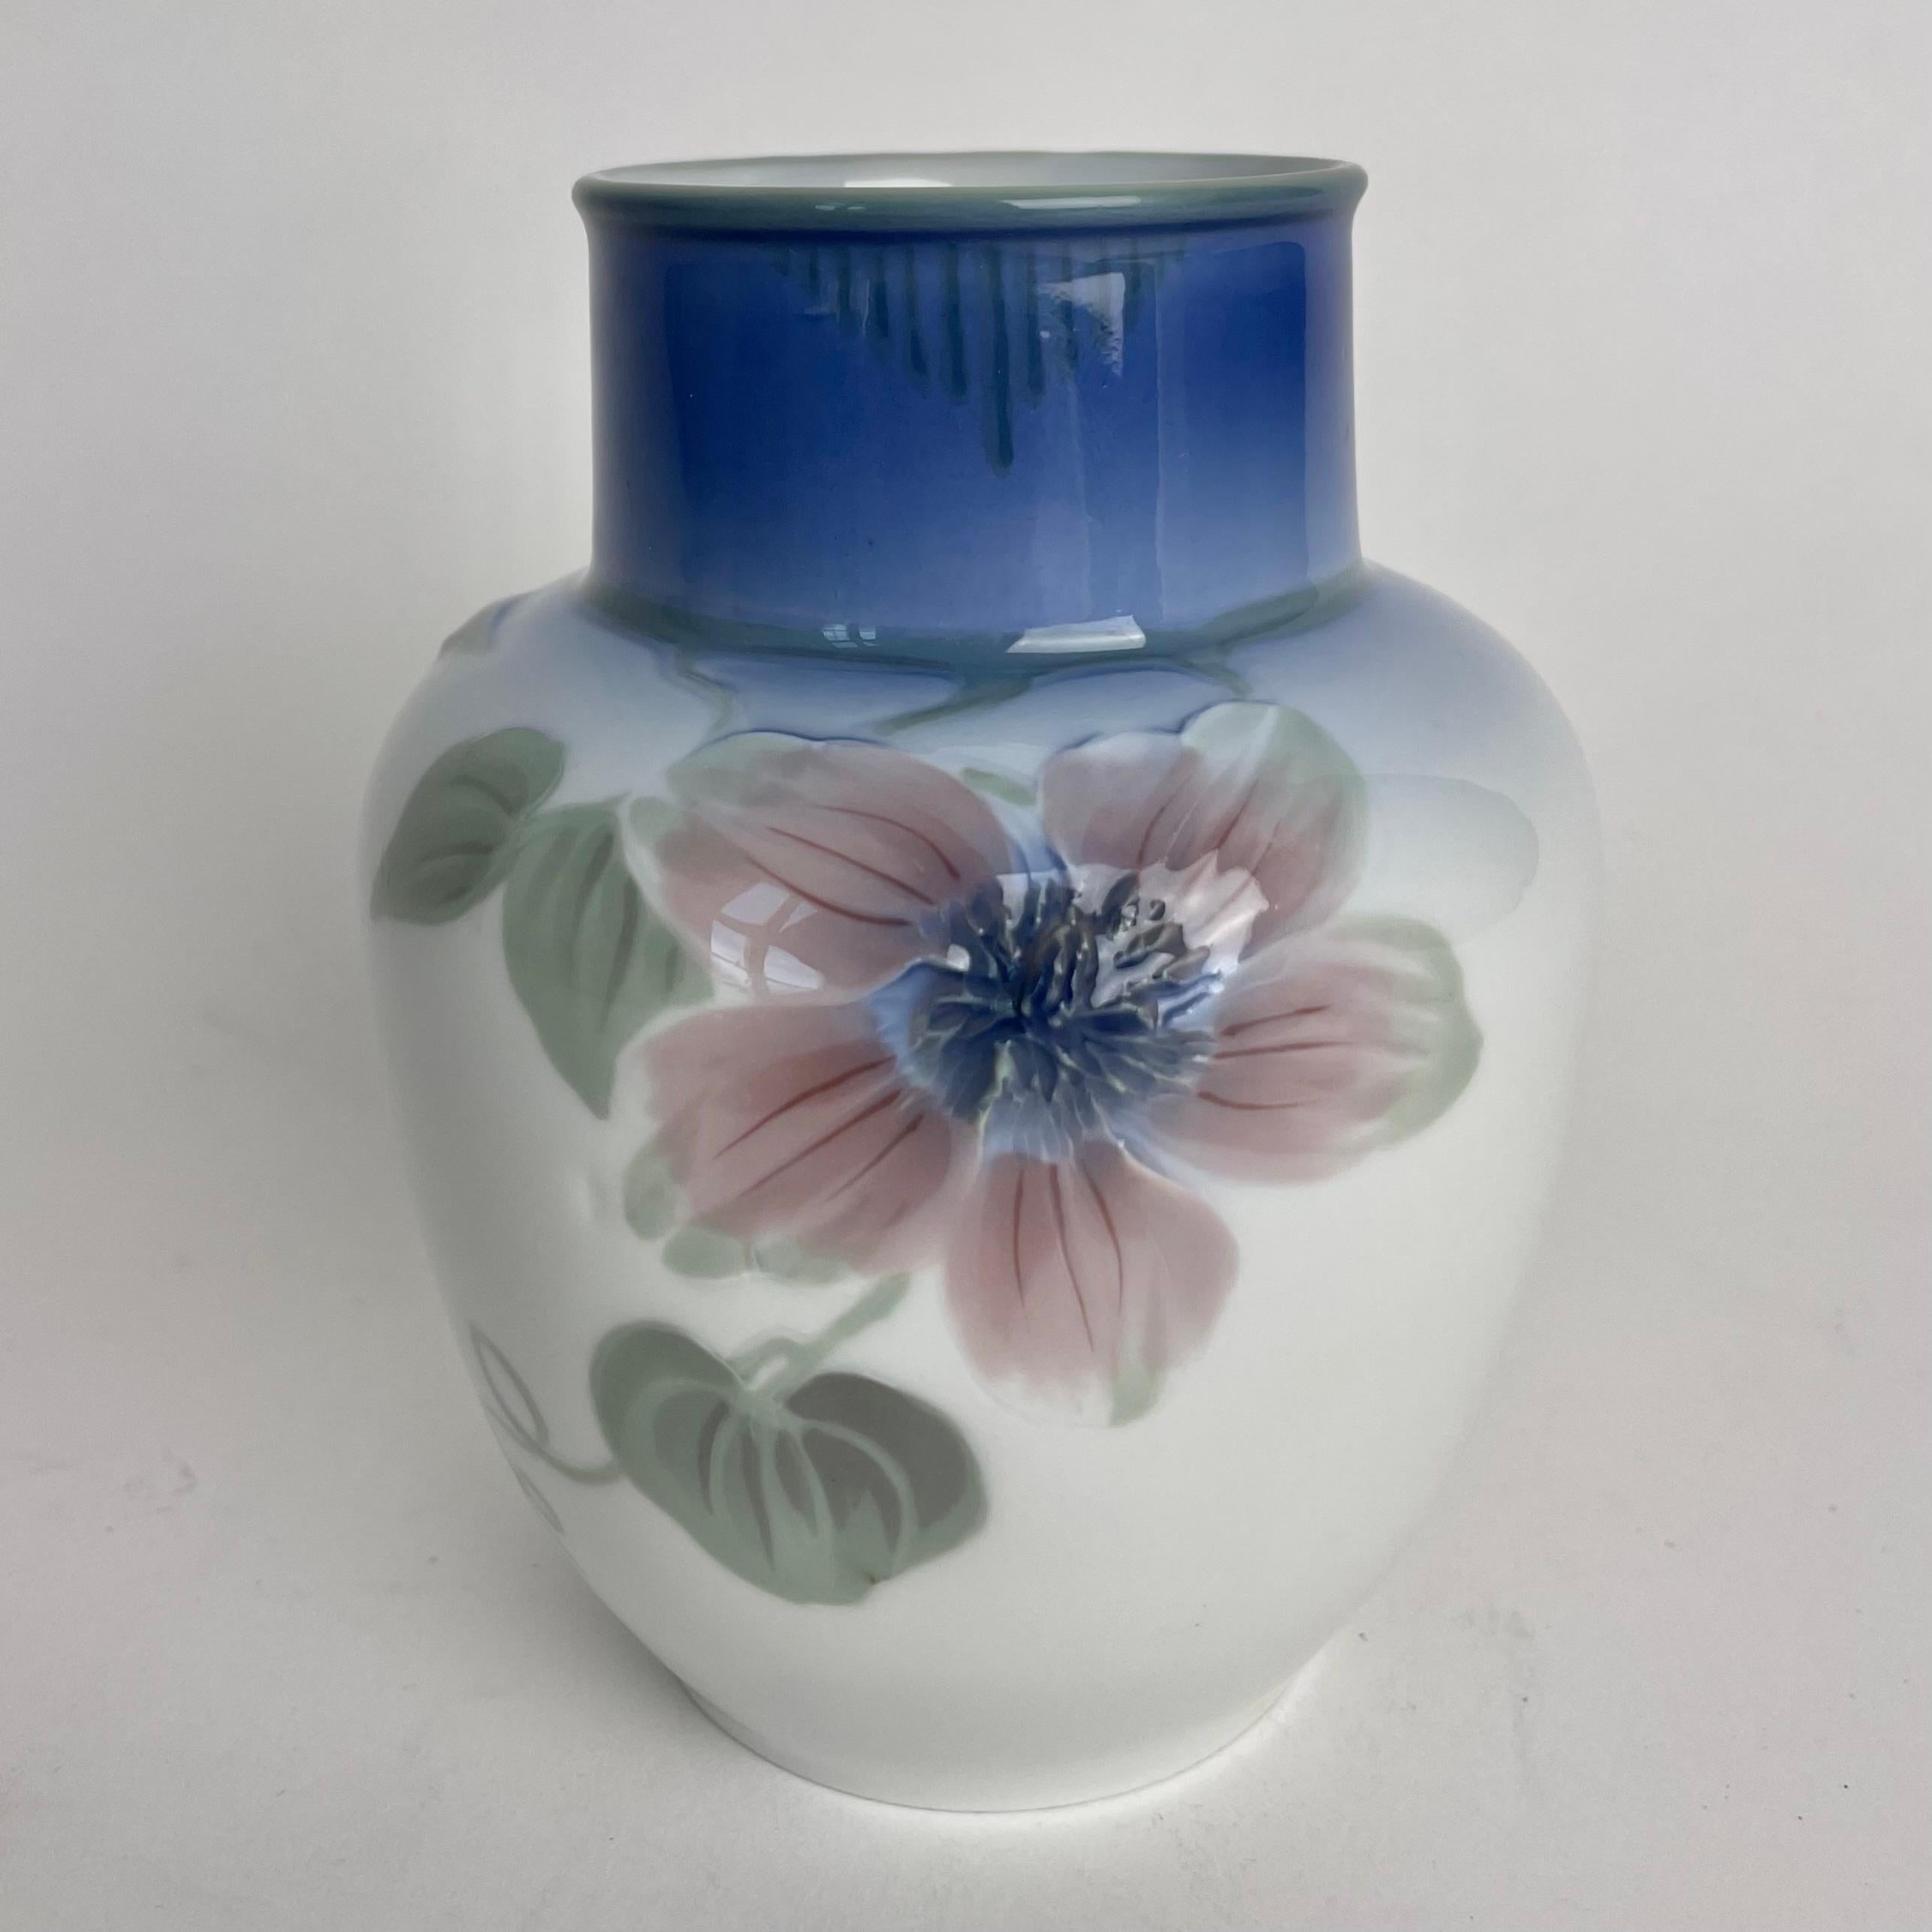 A elegant Art Nouveau Vase in porcelain by Nils Emil Lundström (1865-1960) for Rörstrands Porslinsfabrik in Sweden. Made in early 20th Century. The vase is decorated with flowers and with beautiful colors

Wear consistent with age and use 